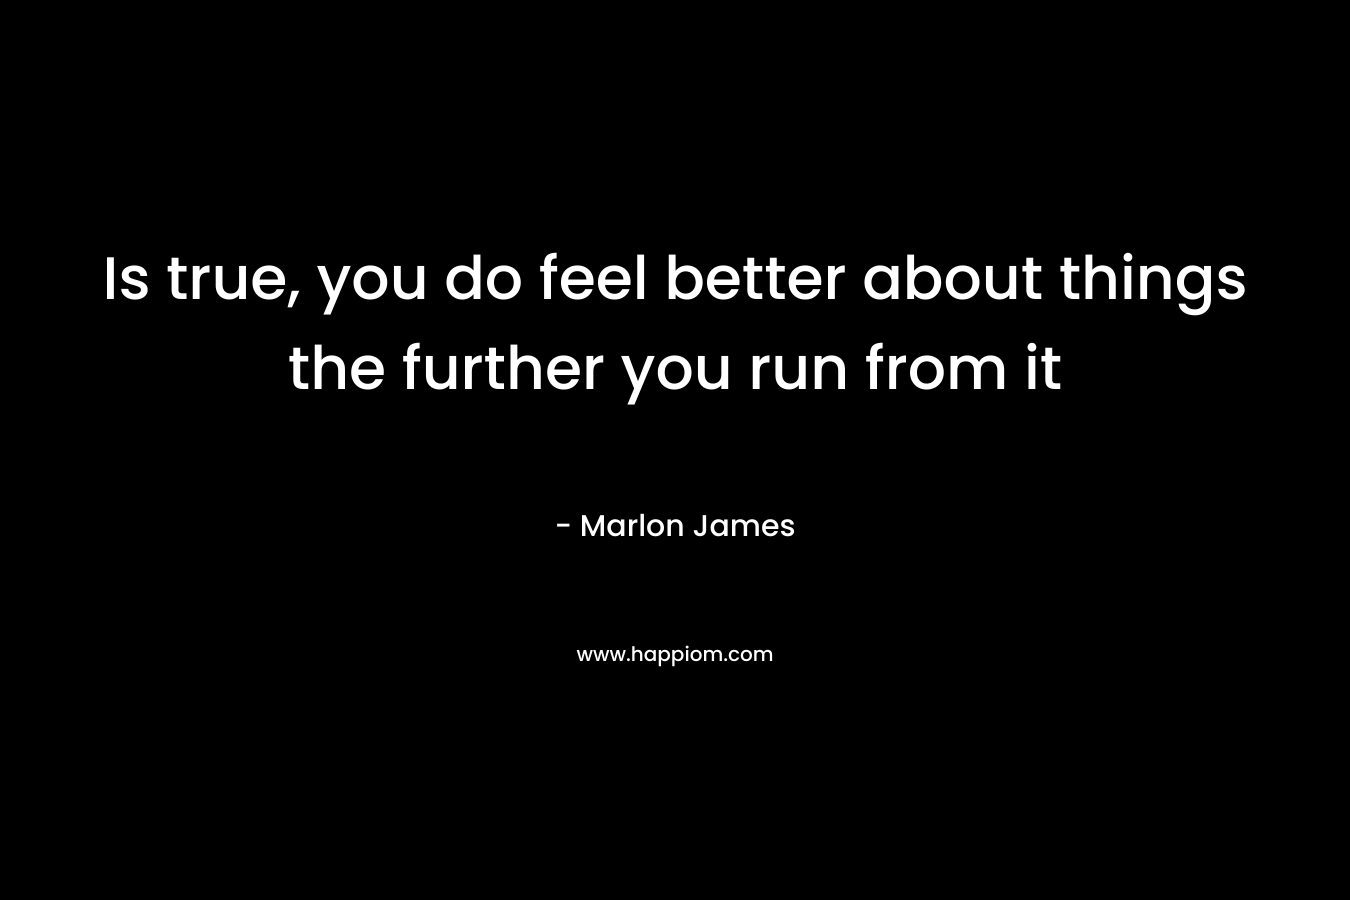 Is true, you do feel better about things the further you run from it – Marlon James